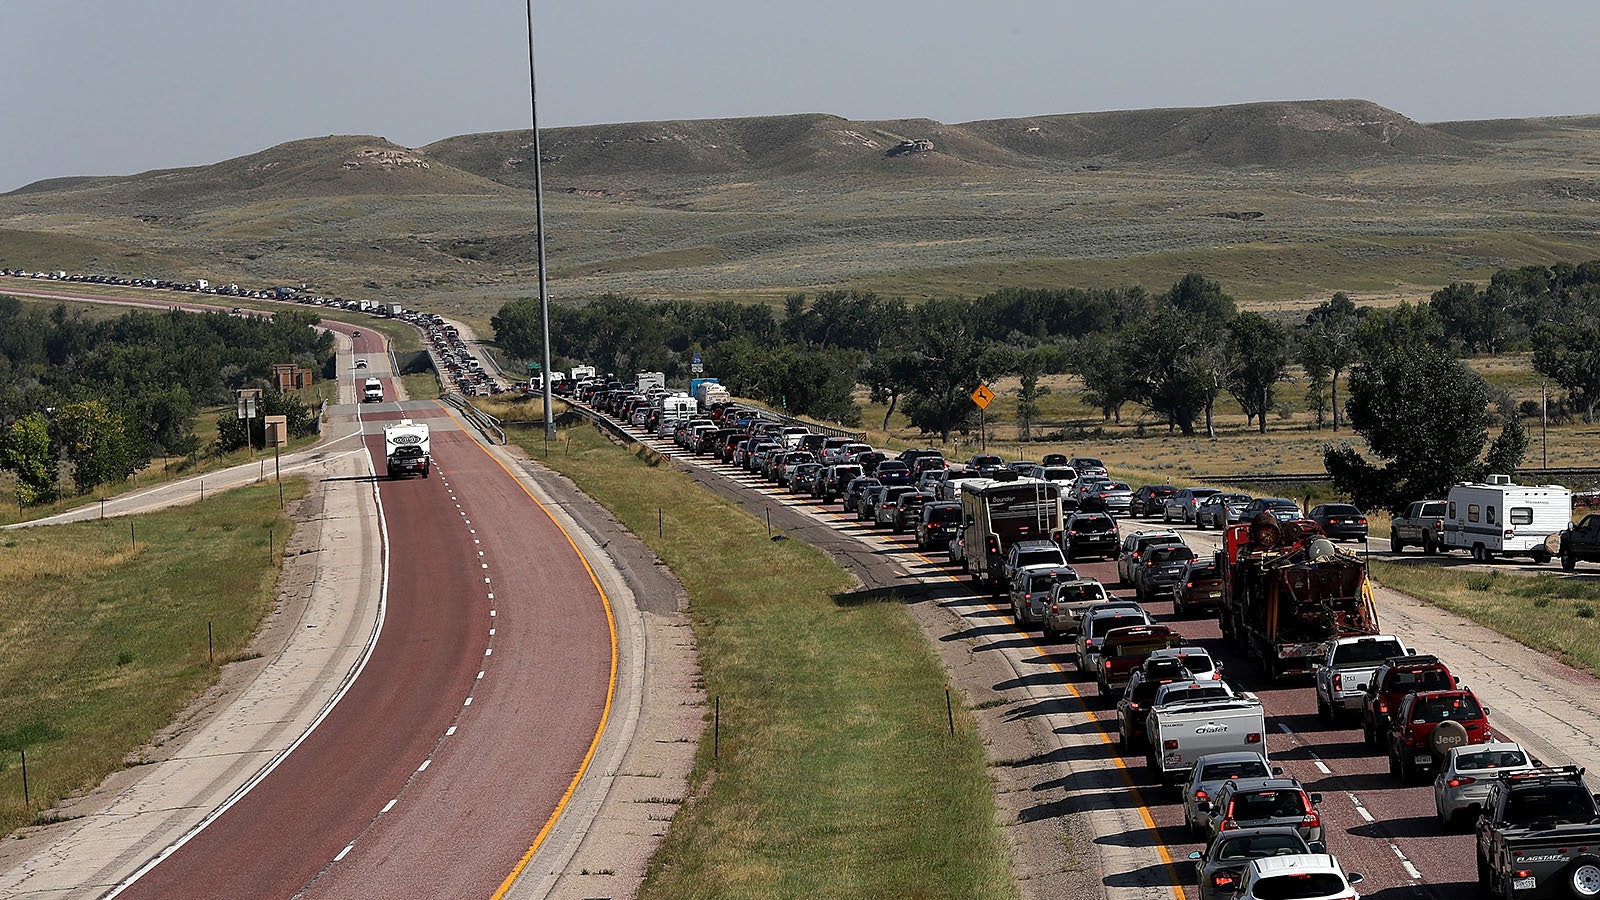 Traffic backs up on Highway 25 leaving Casper on Aug. 21, 2017, in Orin, Wyoming. Millions of people flocked to areas of the U.S. that were in the "path of totality" to experience a total solar eclipse in Wyoming.